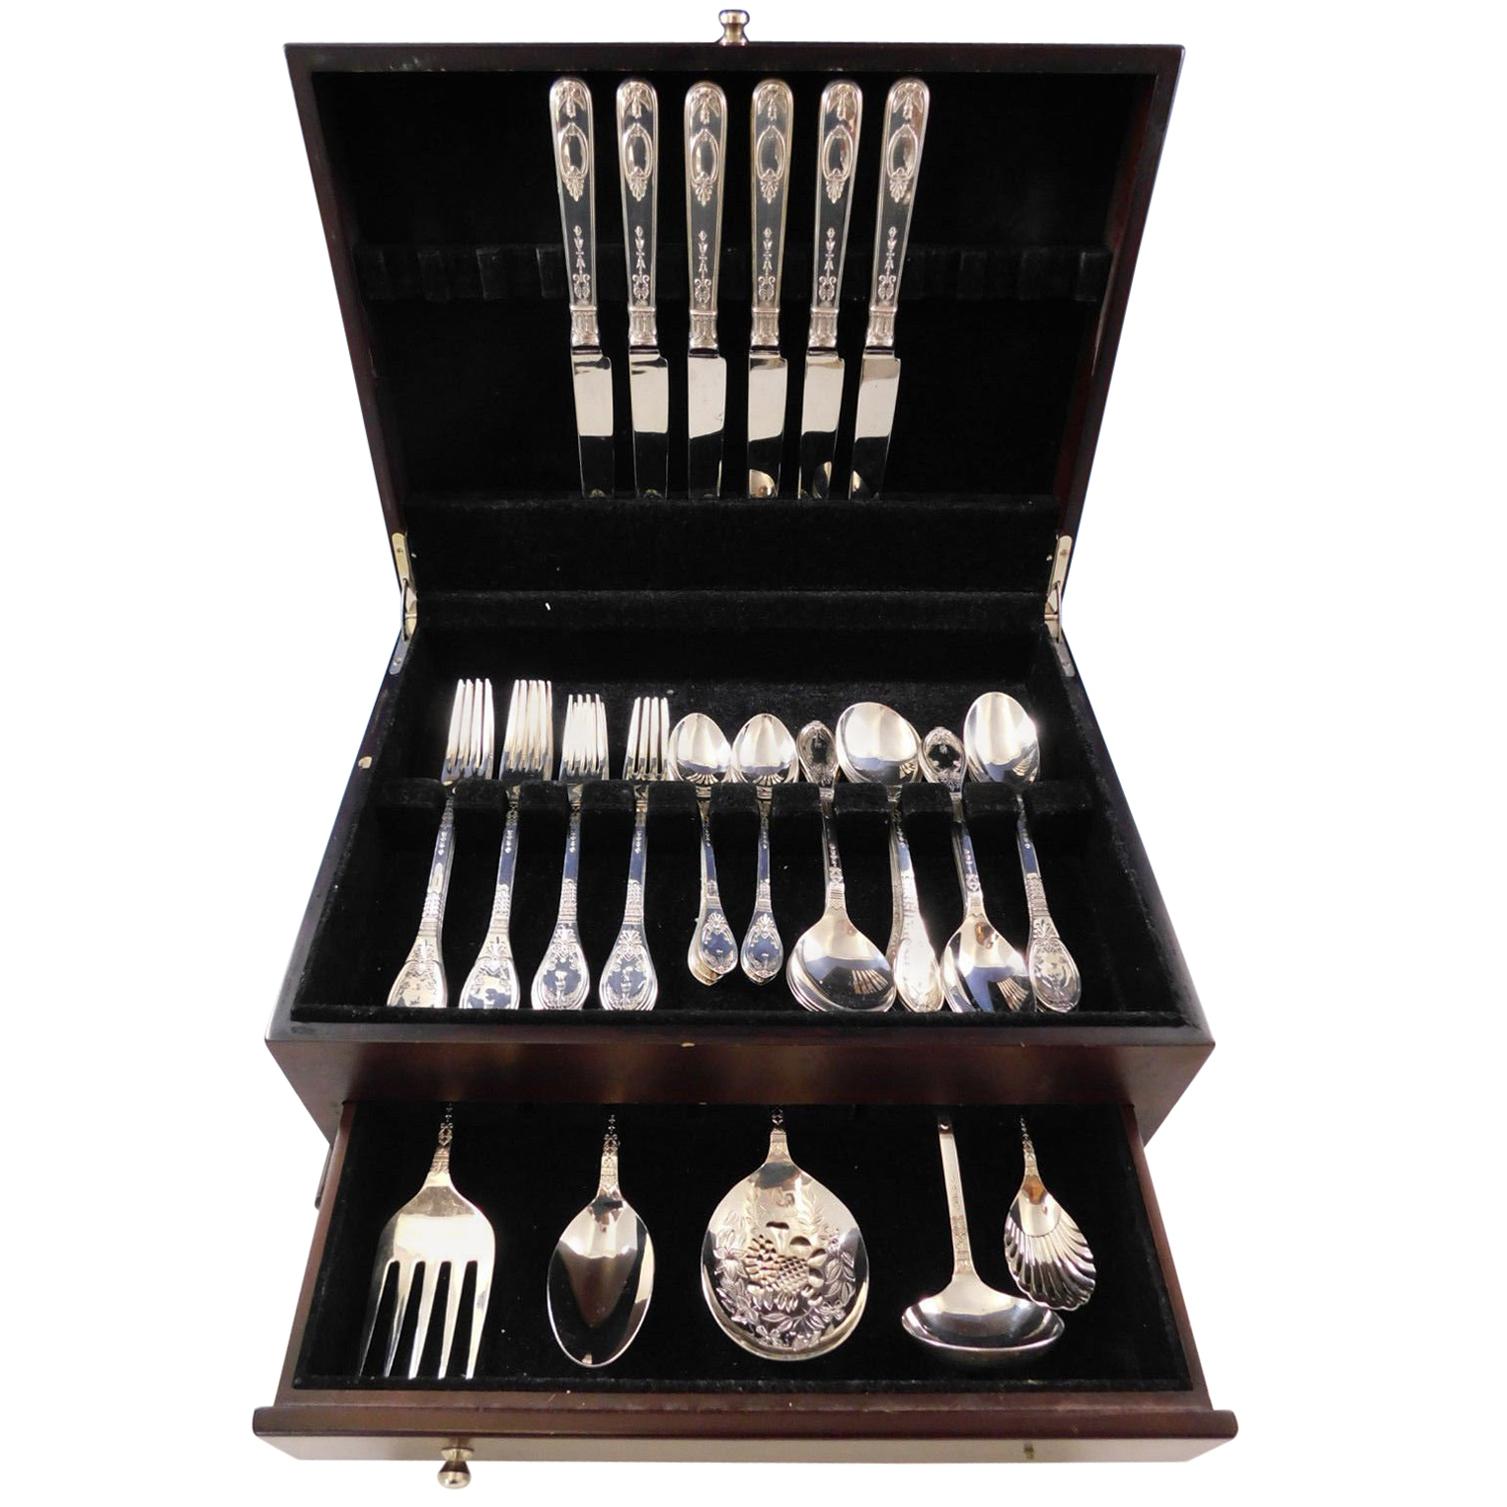 Chateau by Carrs or Sheffield Sterling Silver Flatware Service Set 41 Pcs Dinner